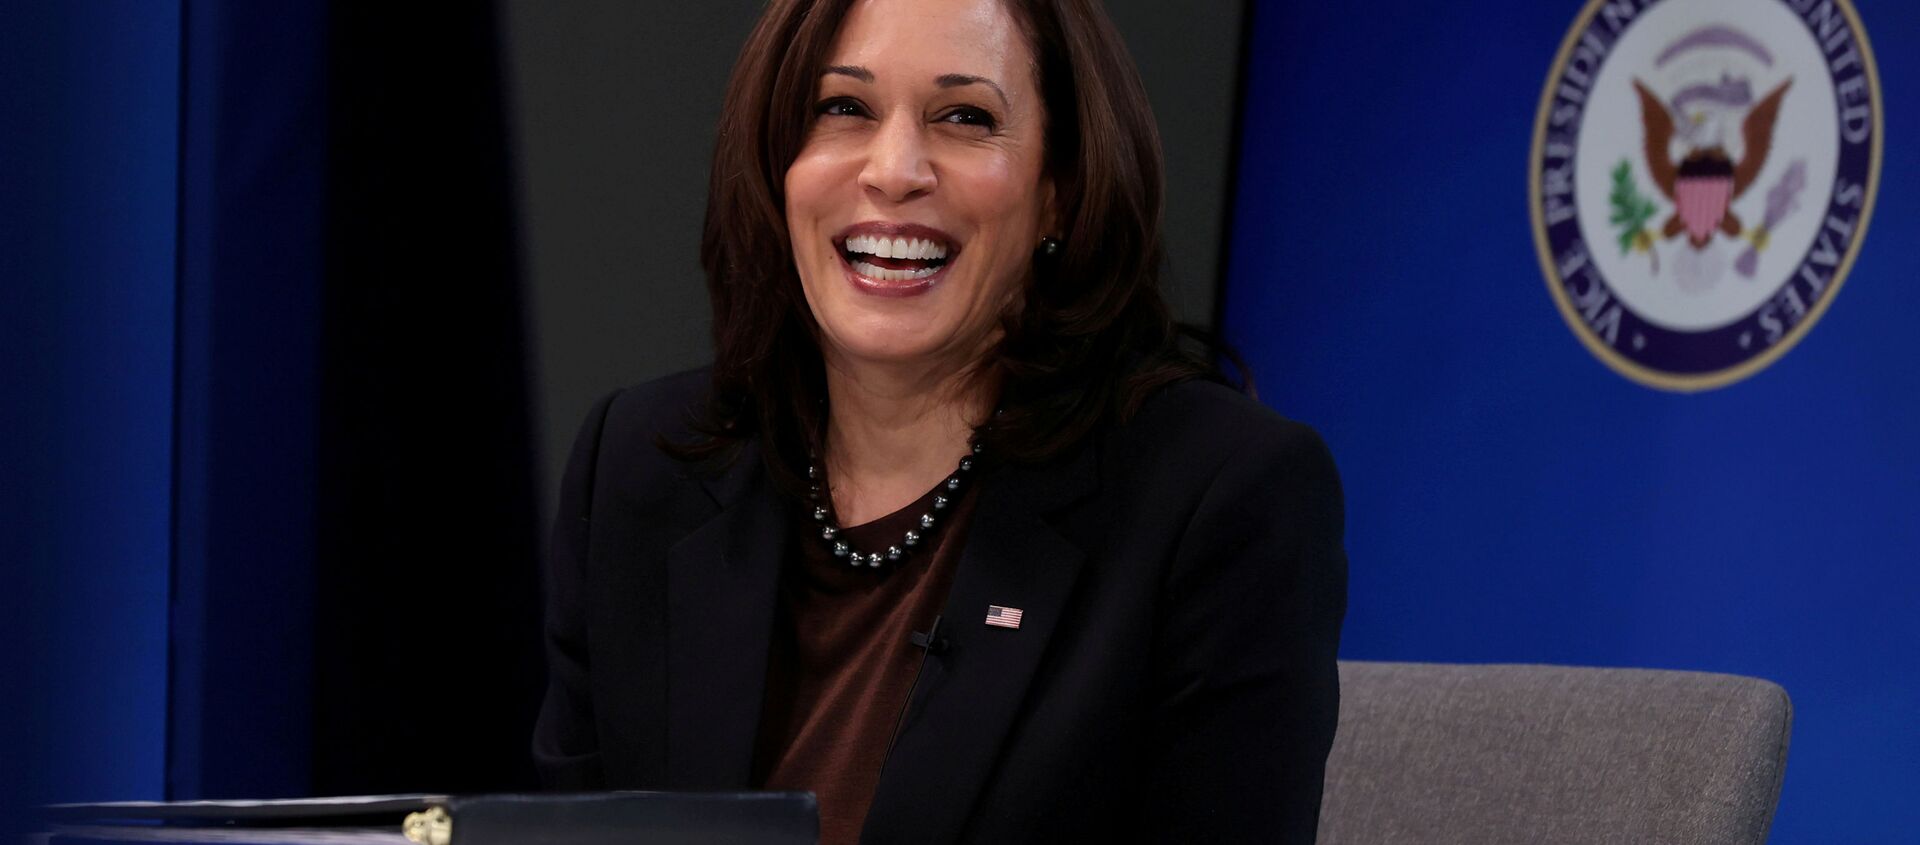 U.S. Vice President Kamala Harris‬ smiles after delivering a keynote address to the House Democratic Caucus virtually on camera from the Eisenhower Executive Office Building at the White House in Washington, U.S. March 2, 2021 - Sputnik International, 1920, 23.03.2021